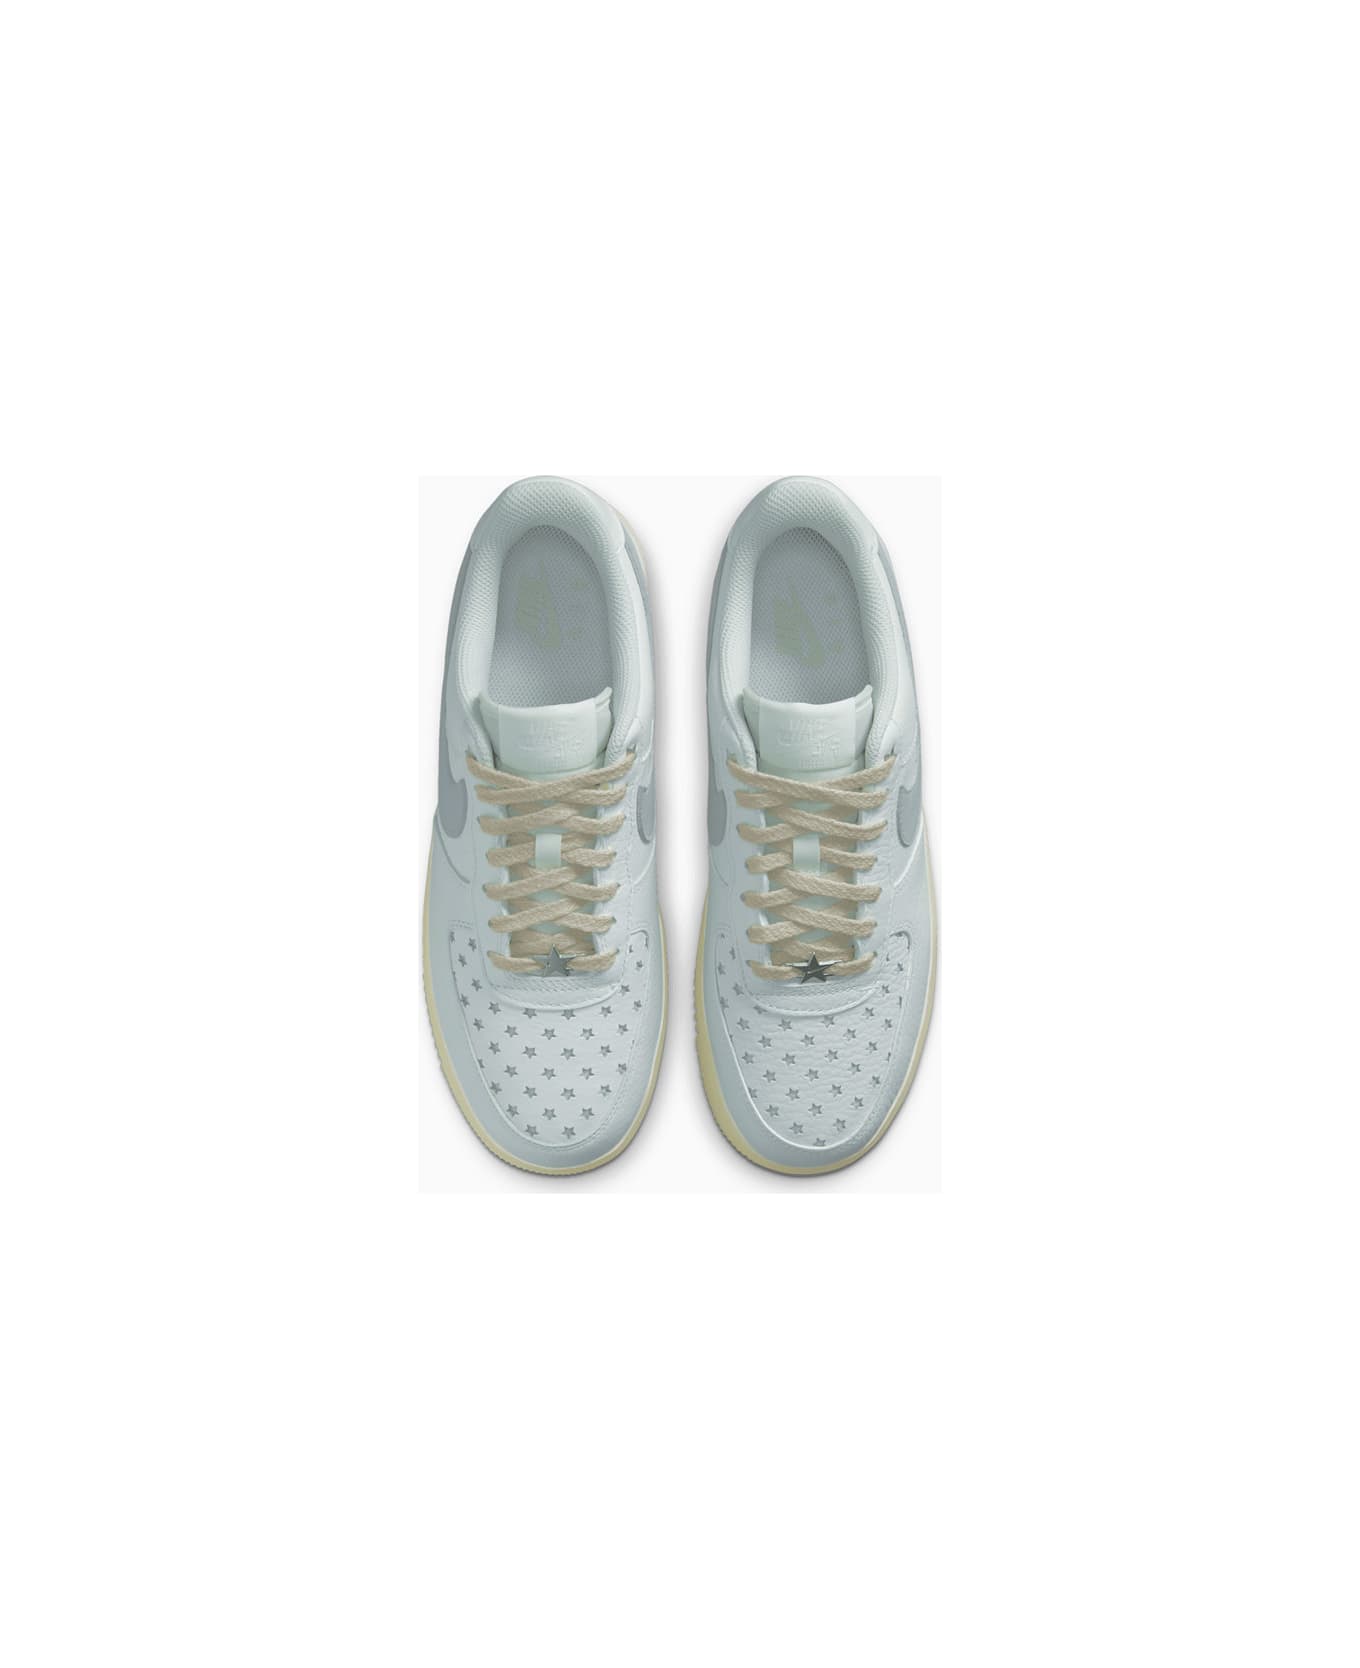 Nike Air Force 1 '07 Sneakers Fd0793-100 - White スニーカー